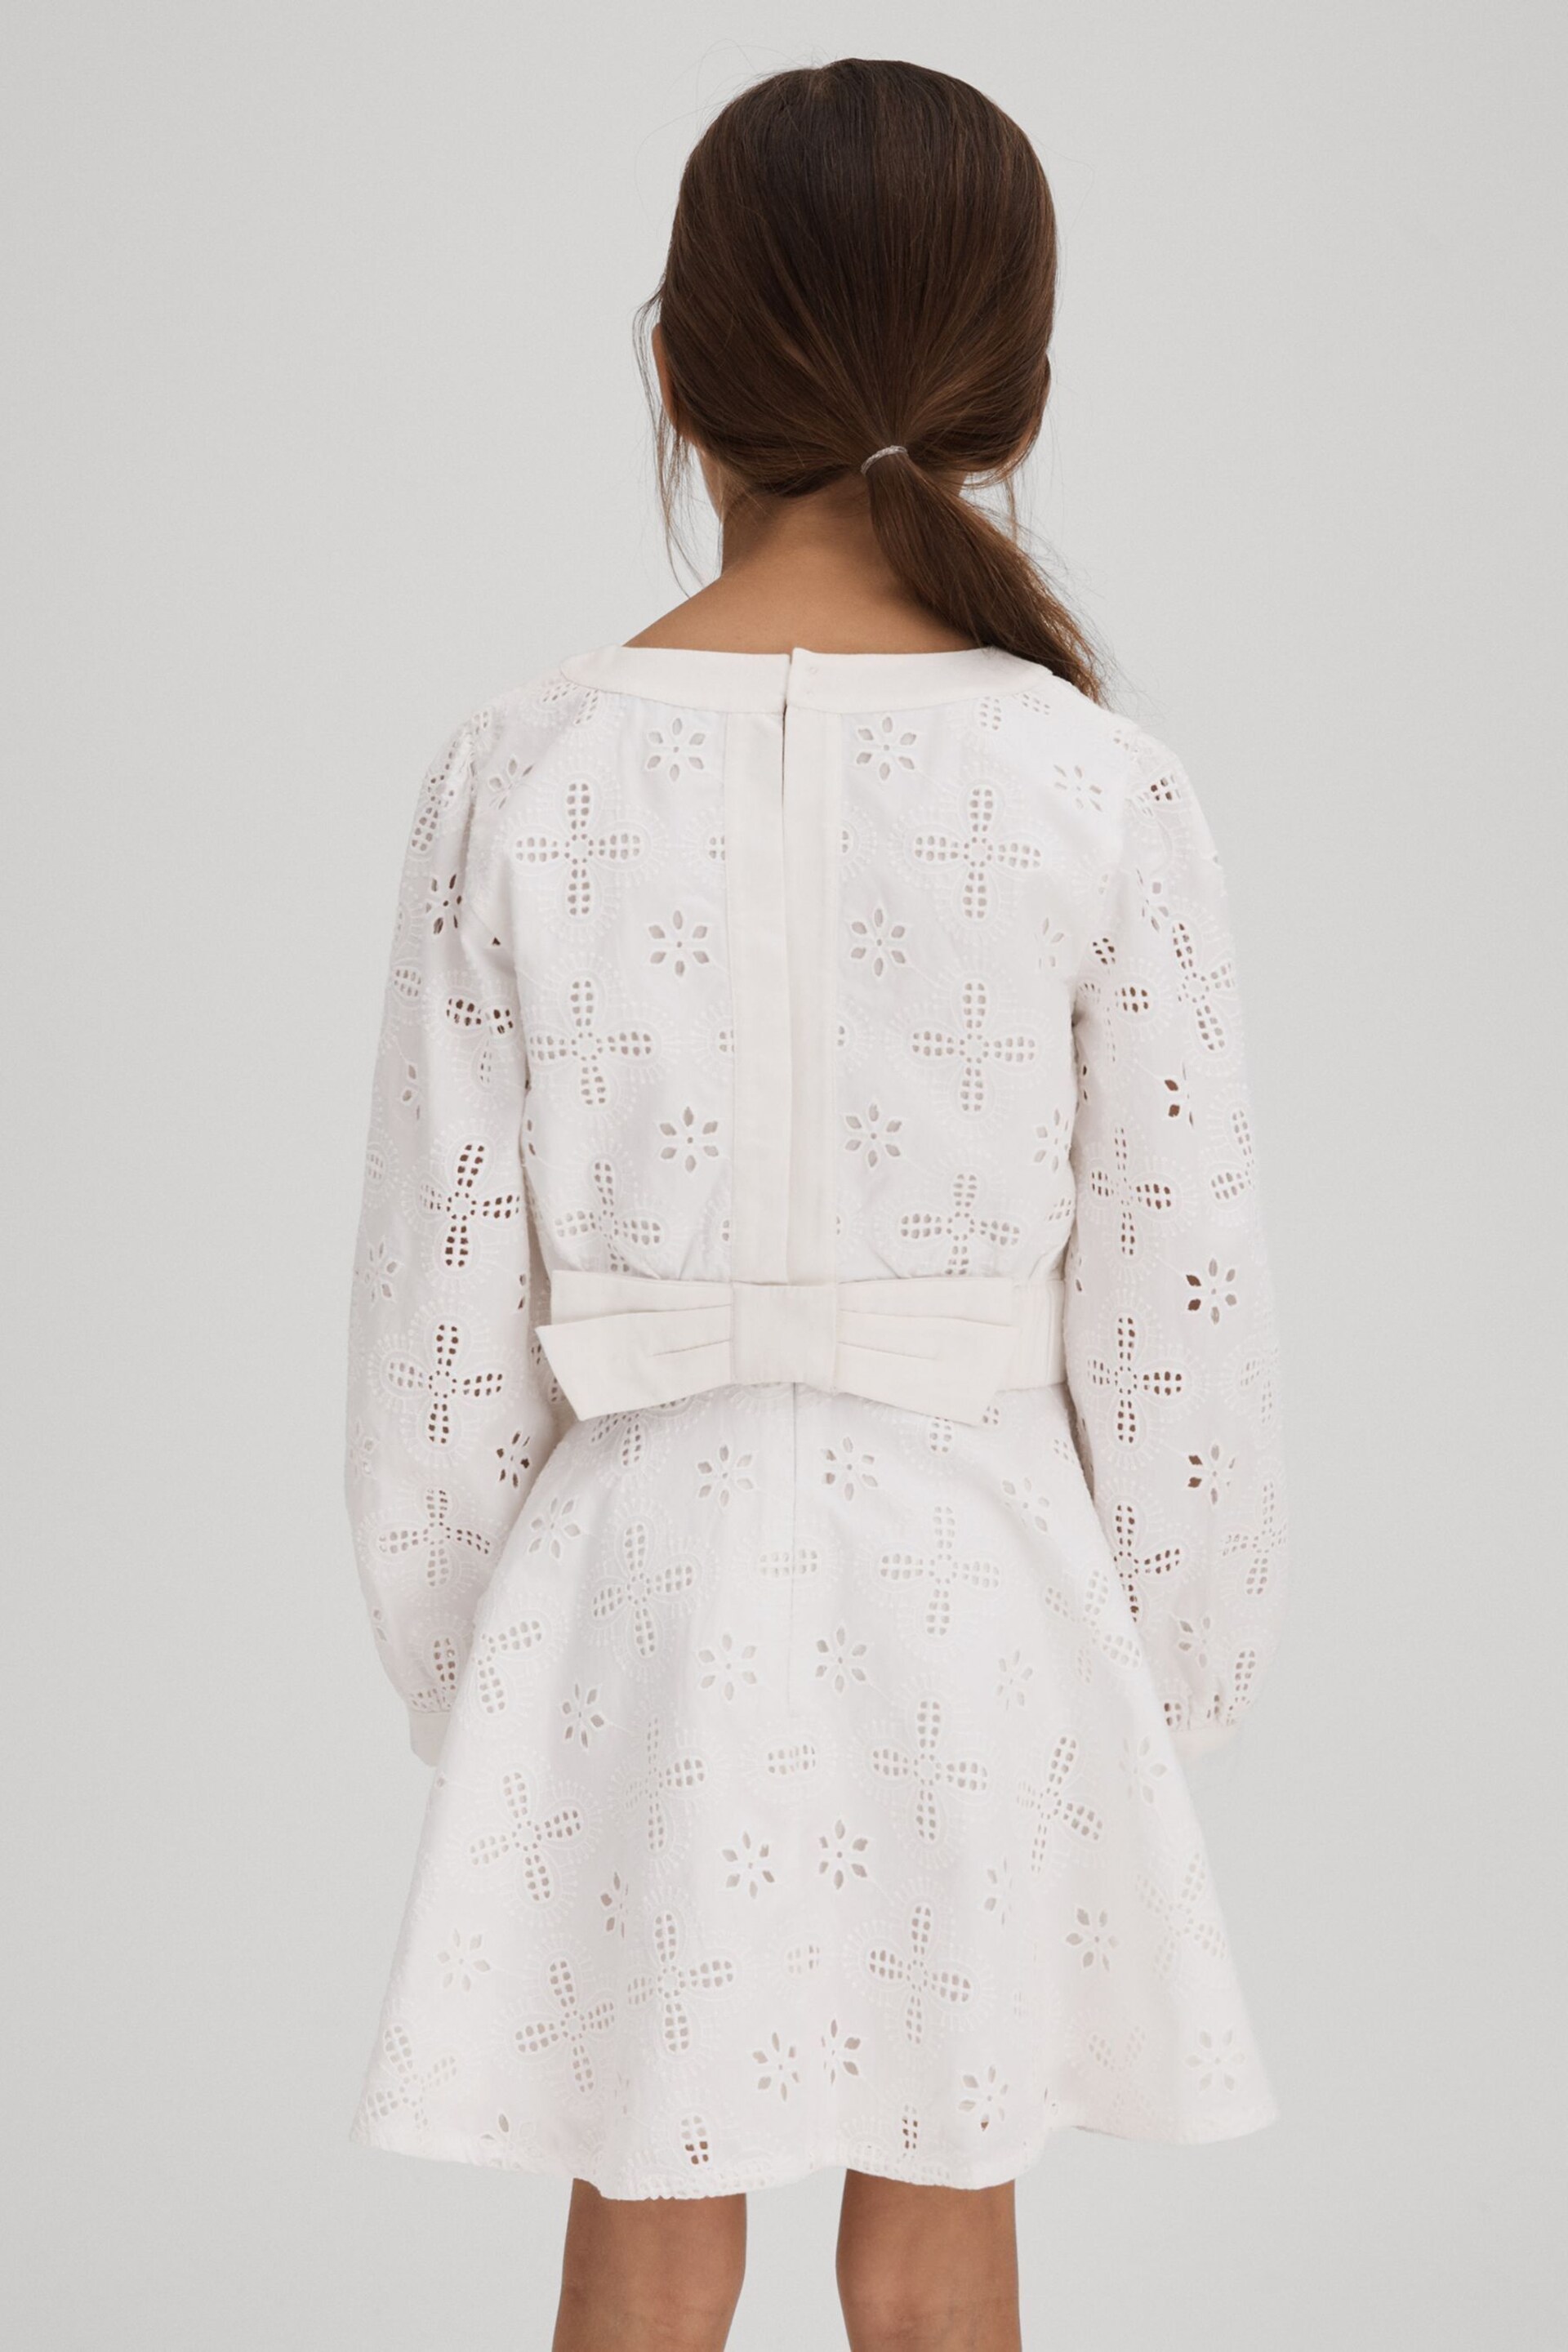 Reiss Ivory Nella Senior Cotton Broderie Lace Skirt - Image 6 of 7